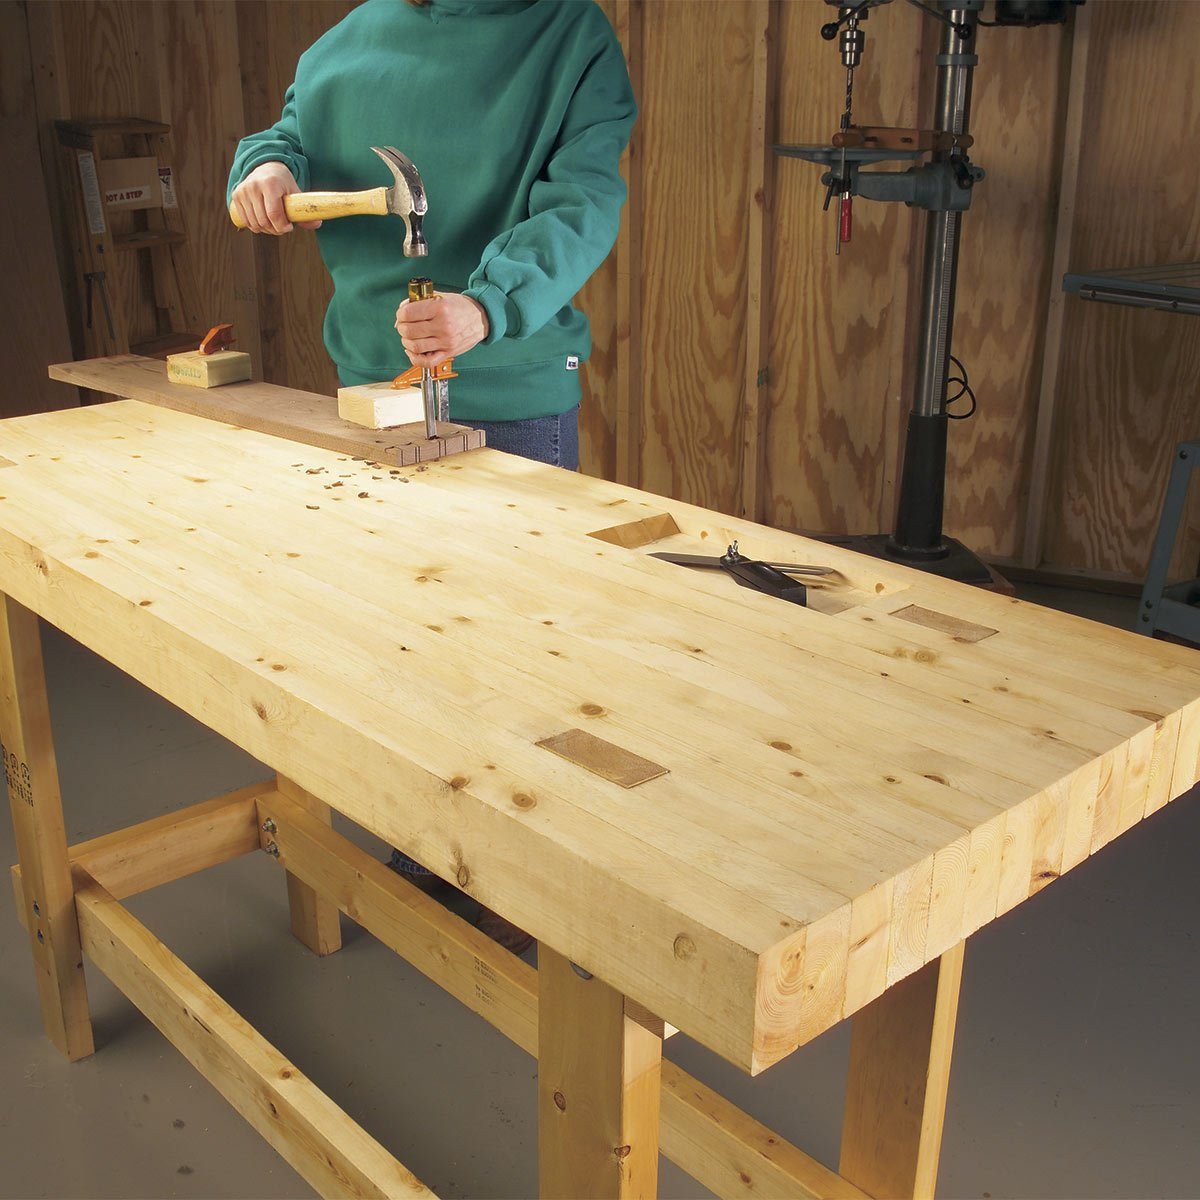 DIY Bench Plans
 12 Super Simple Workbenches You Can Build — The Family